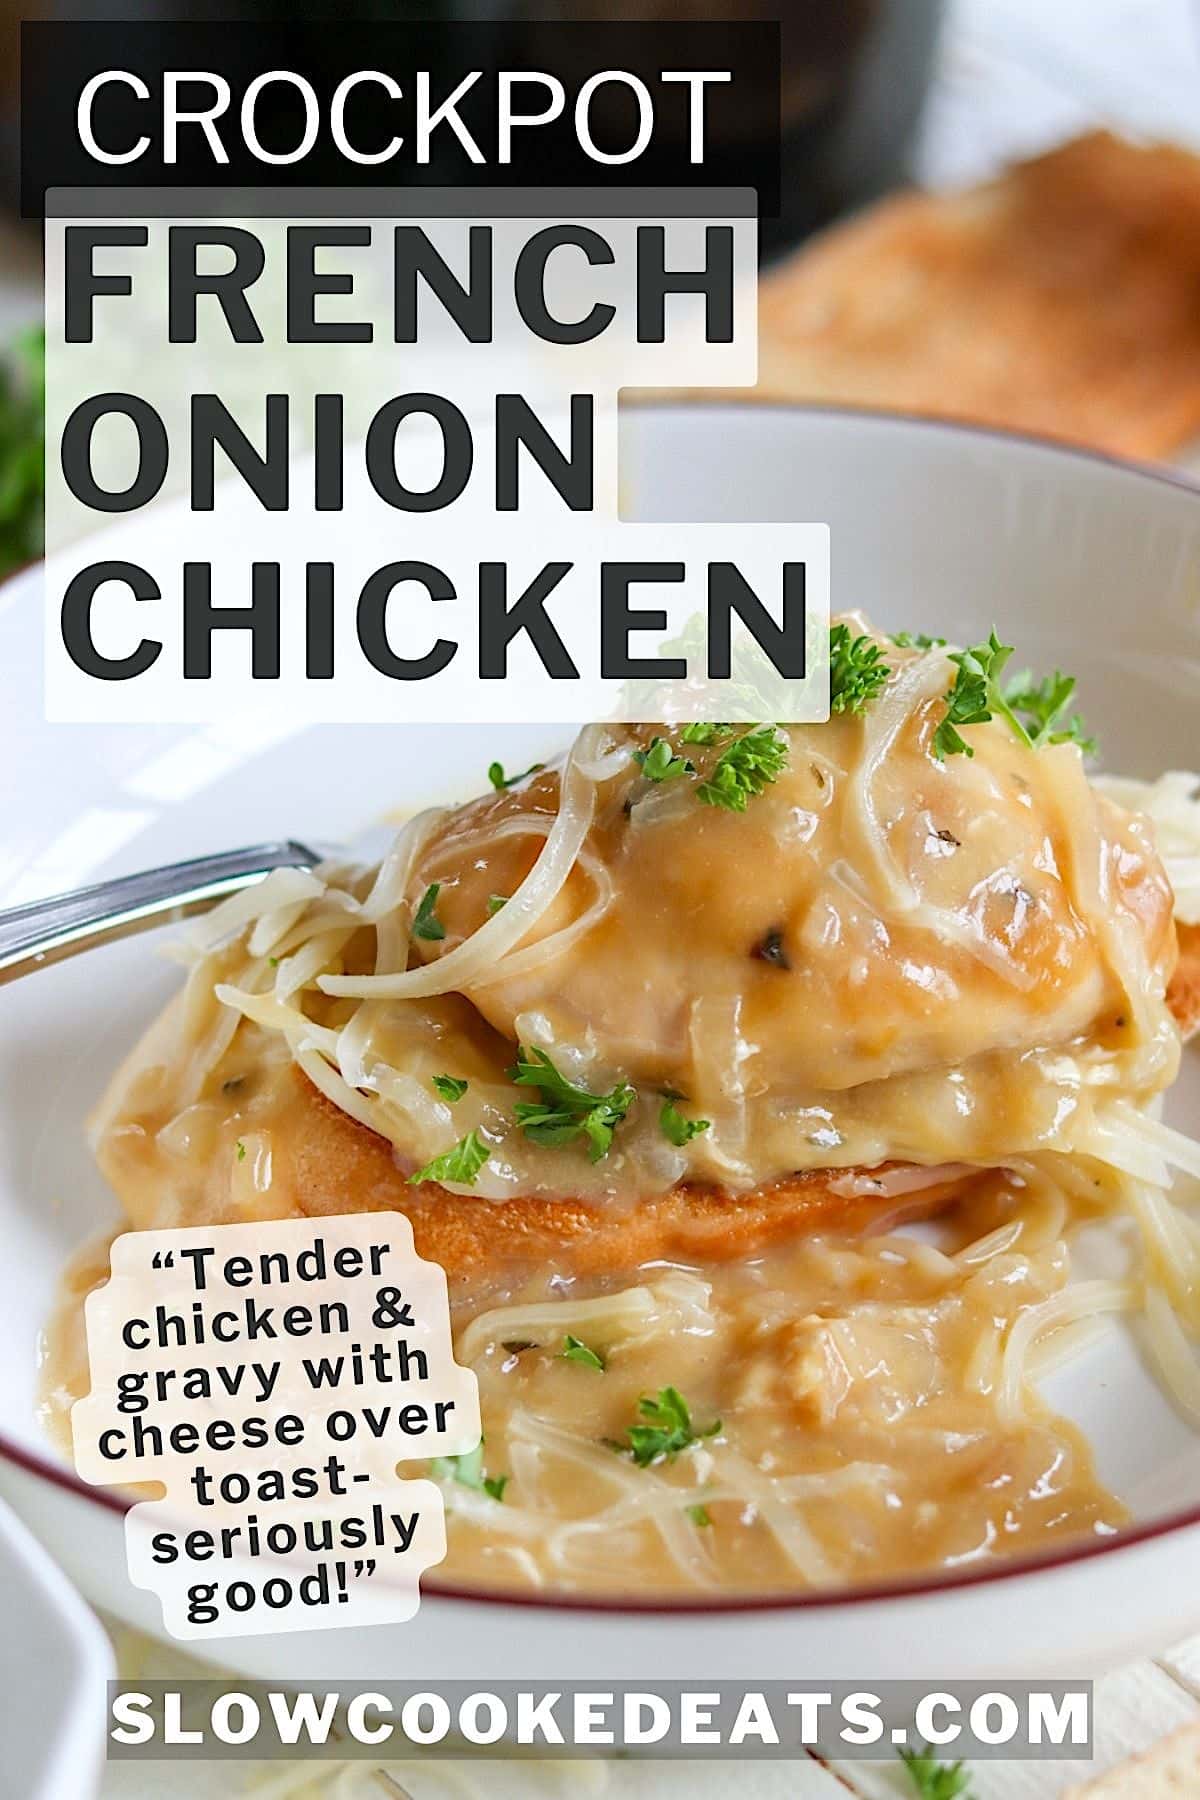 Creamy French onion chicken crock pot recipe served over toasted breast with shredded cheese and fresh parsley in a white bowl.